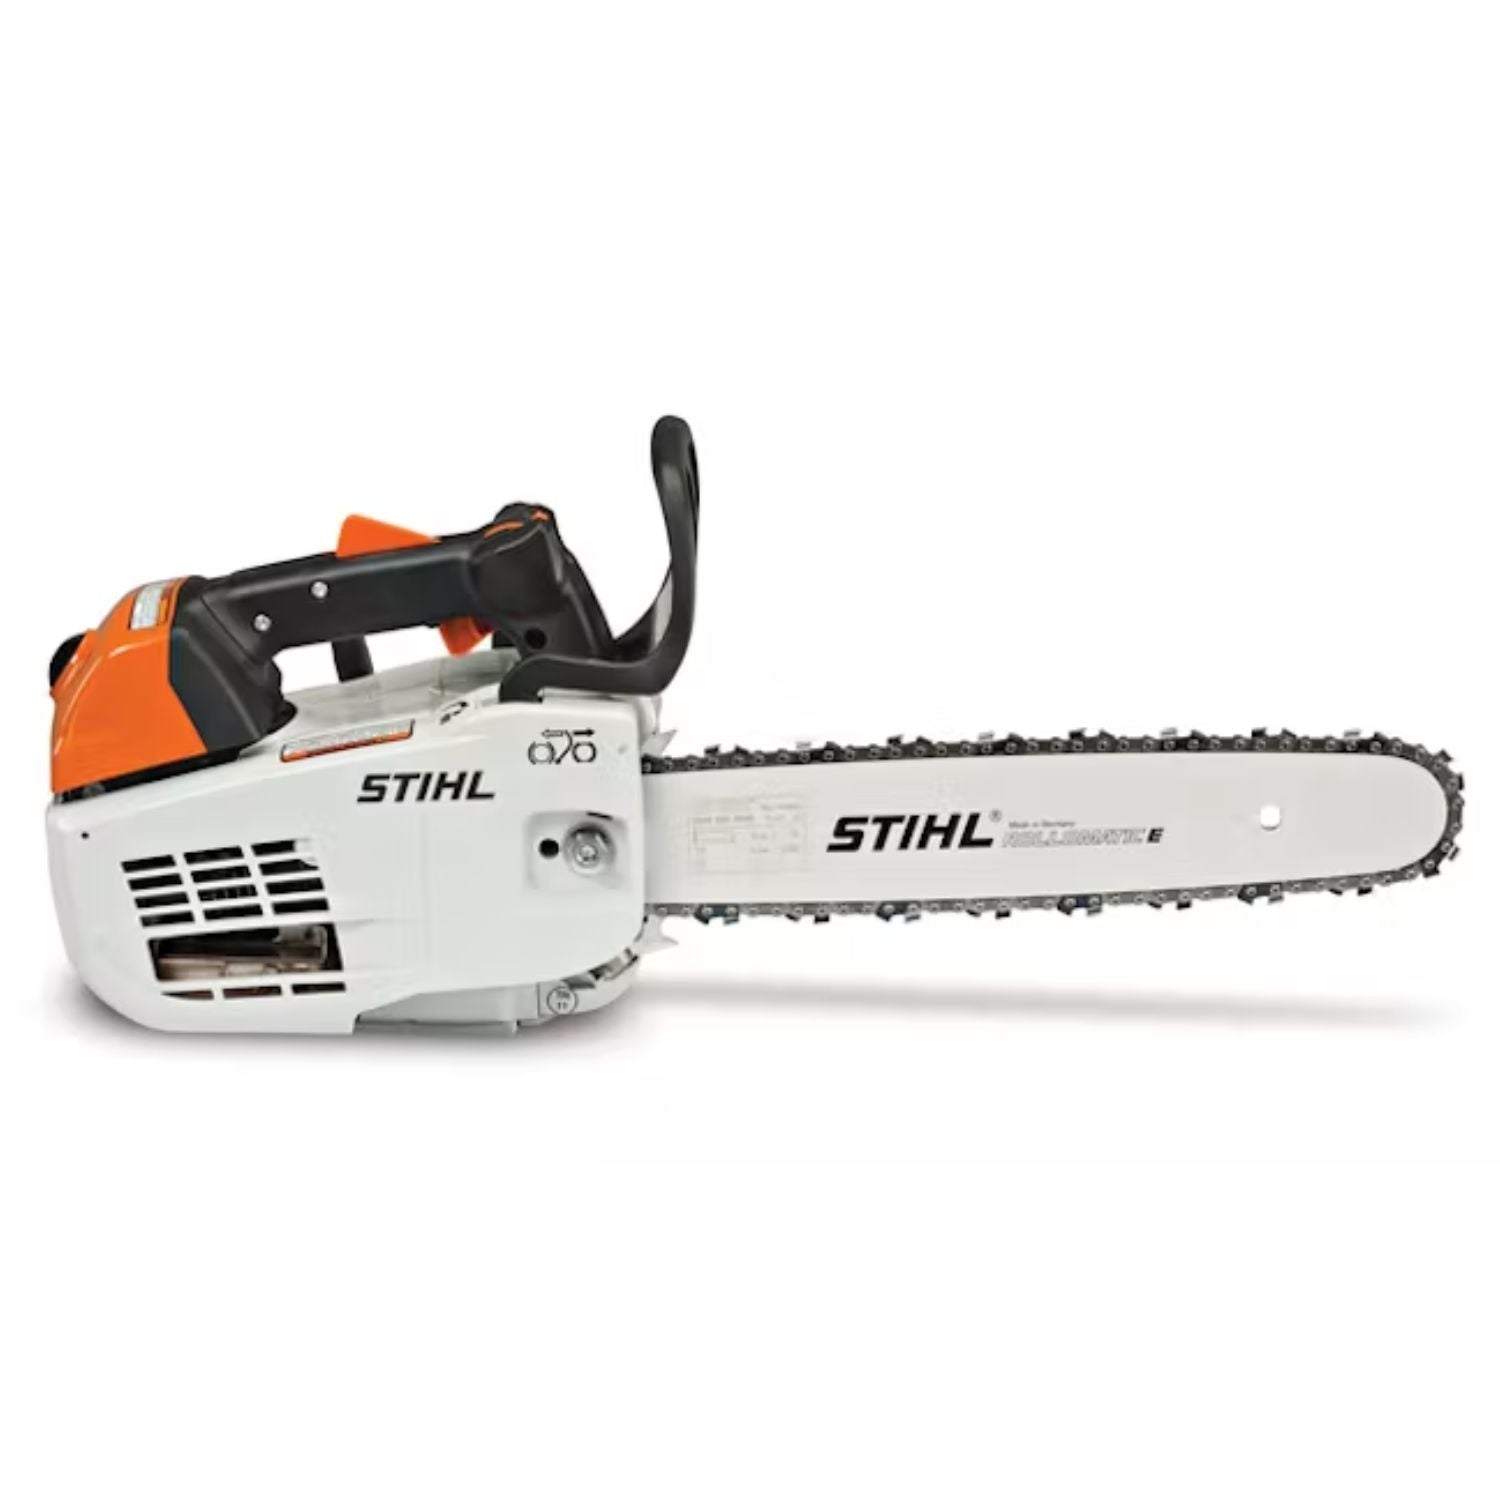 Stihl MS 201 T C-M 14 Inch In-Tree Chainsaw with M-Tronic™ - Main Street Mower | Winter Garden, Ocala, Clermont